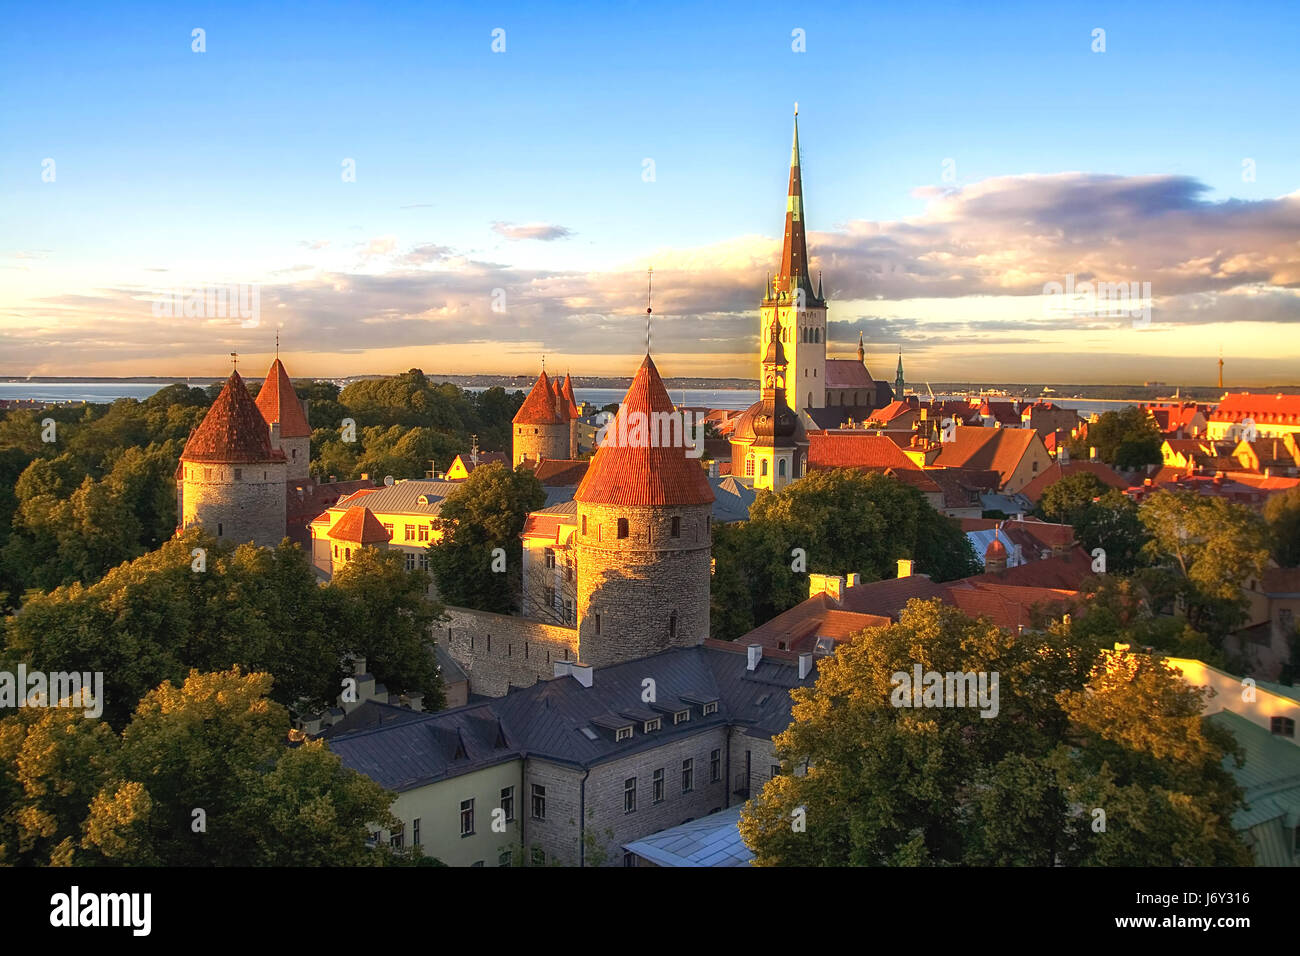 Old Talling castle and downtown historic city from elevated lookout at sunset. Stock Photo